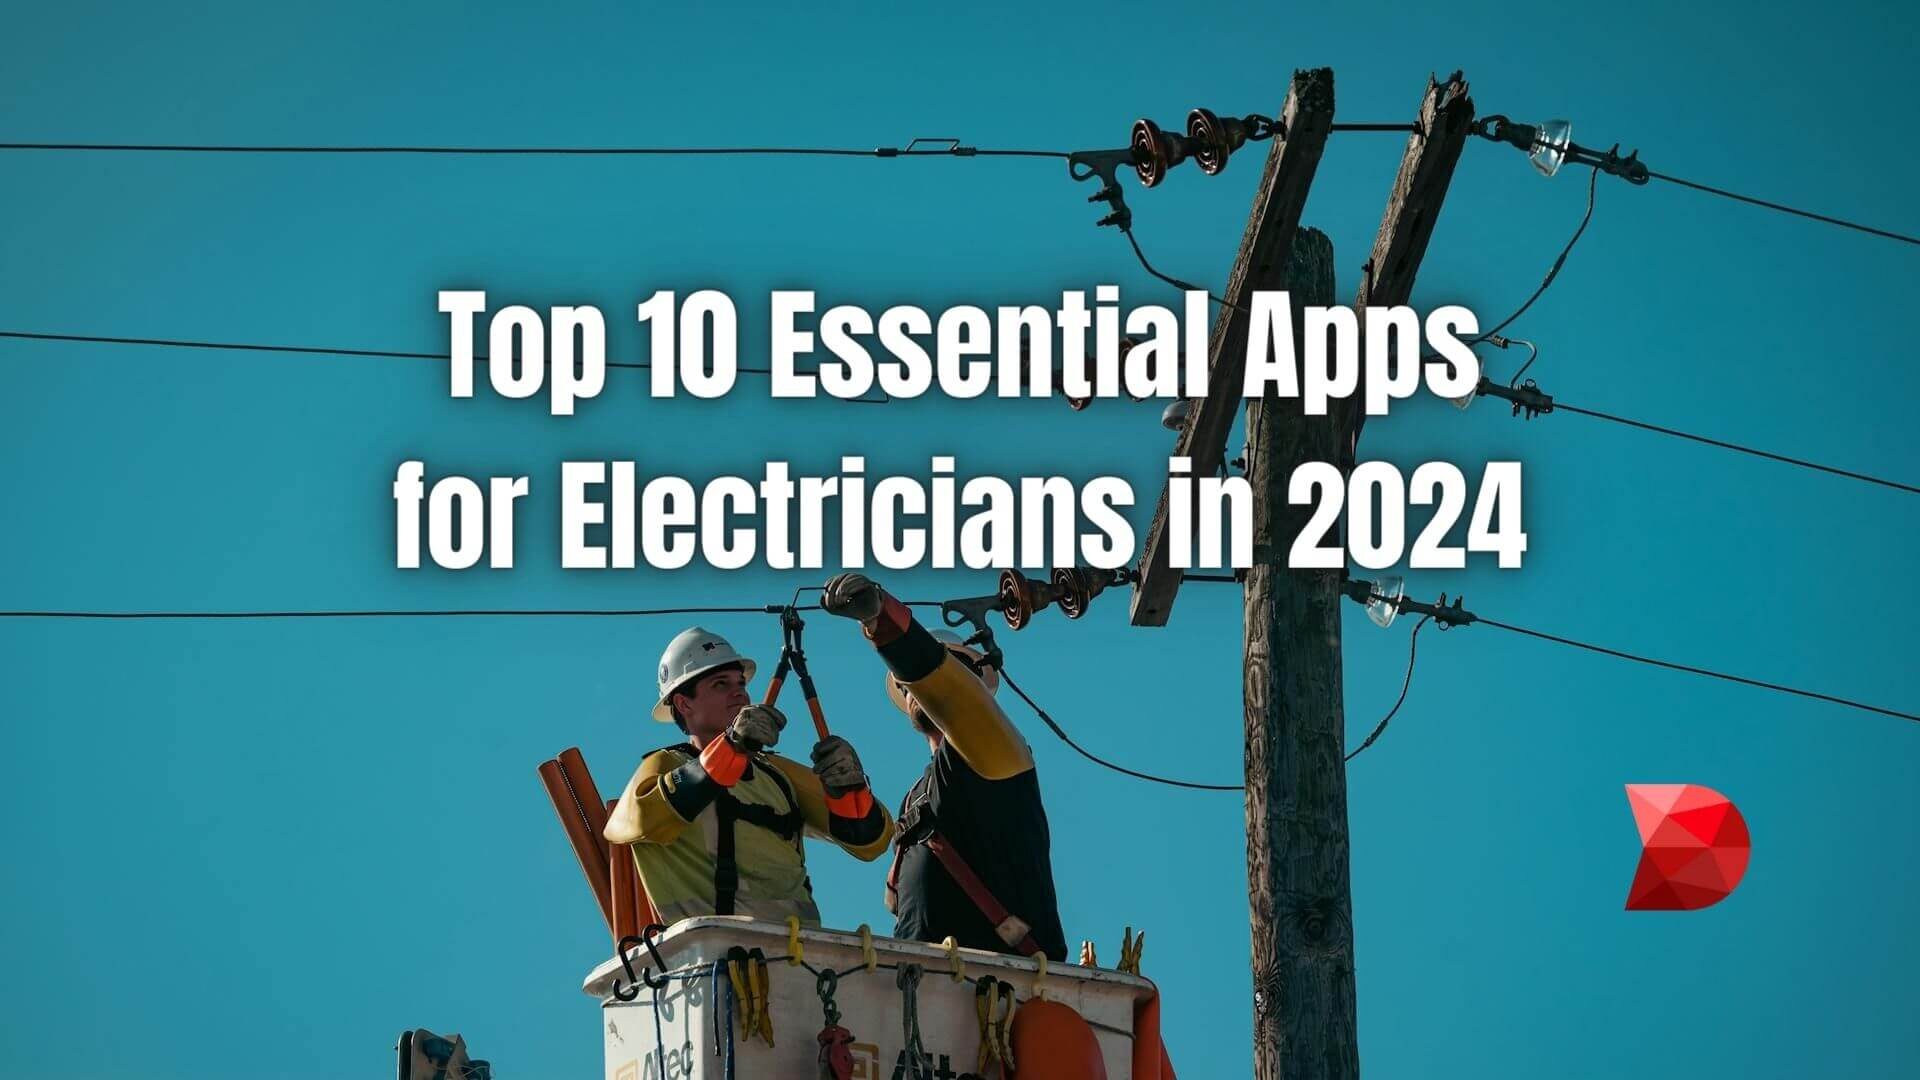 Empower your electrical projects! Click here to uncover the Top 10 Essential Apps for Electricians in 2024 and stay ahead in the digital era.